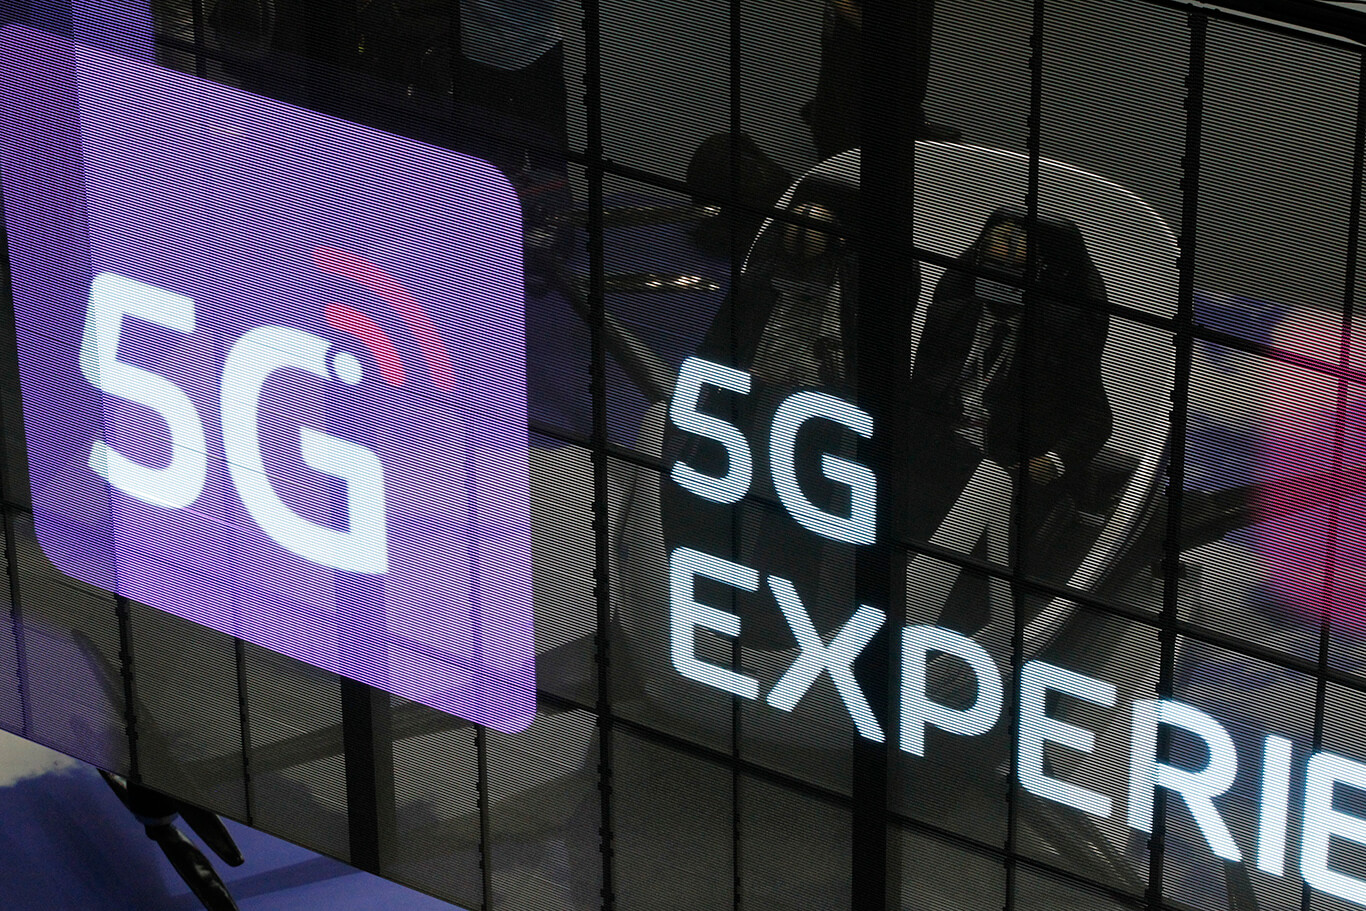 MWC 2019 presented the 5G intelligent connection